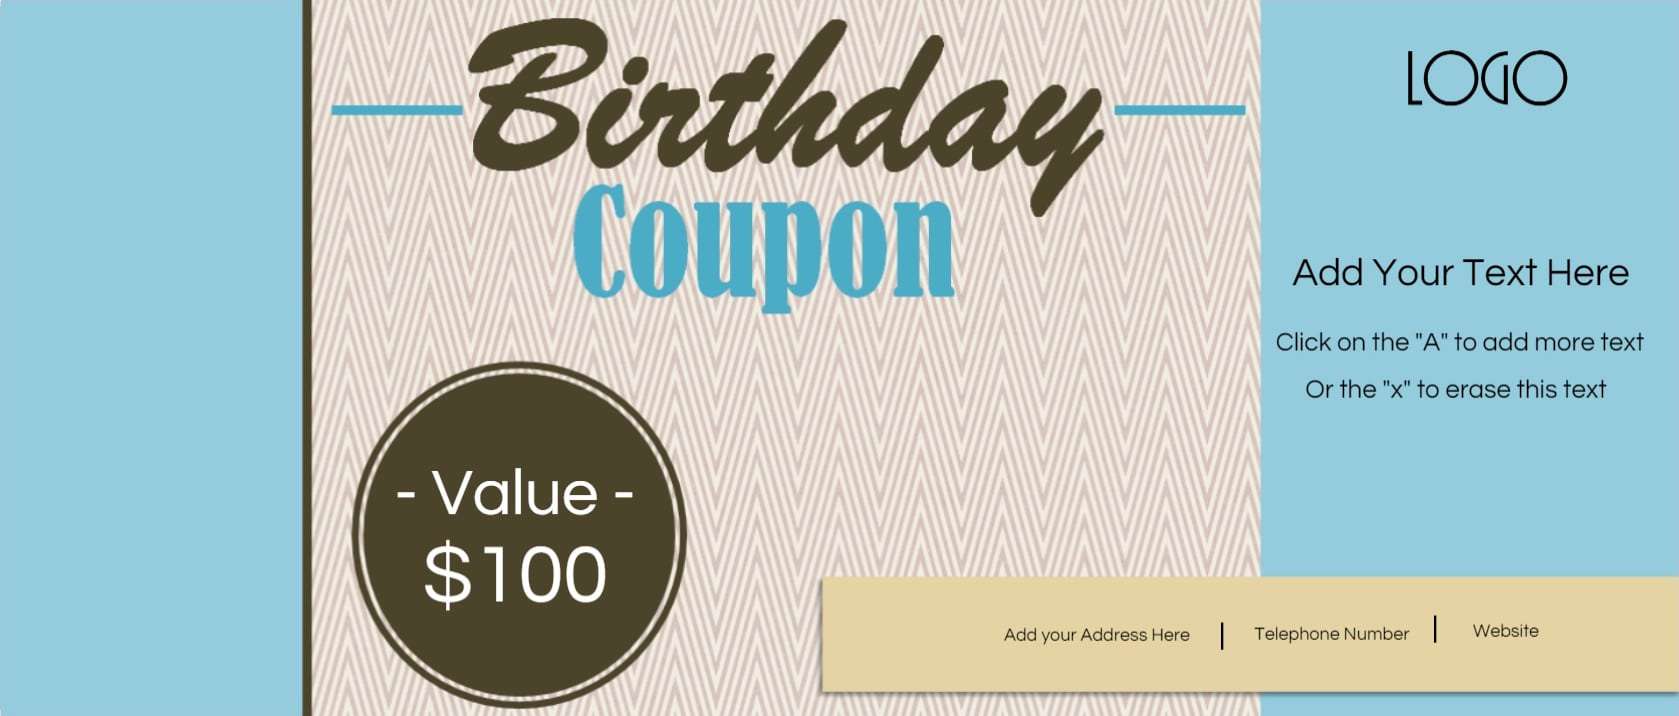 Free Custom Birthday Coupons - Customize Online & Print at 